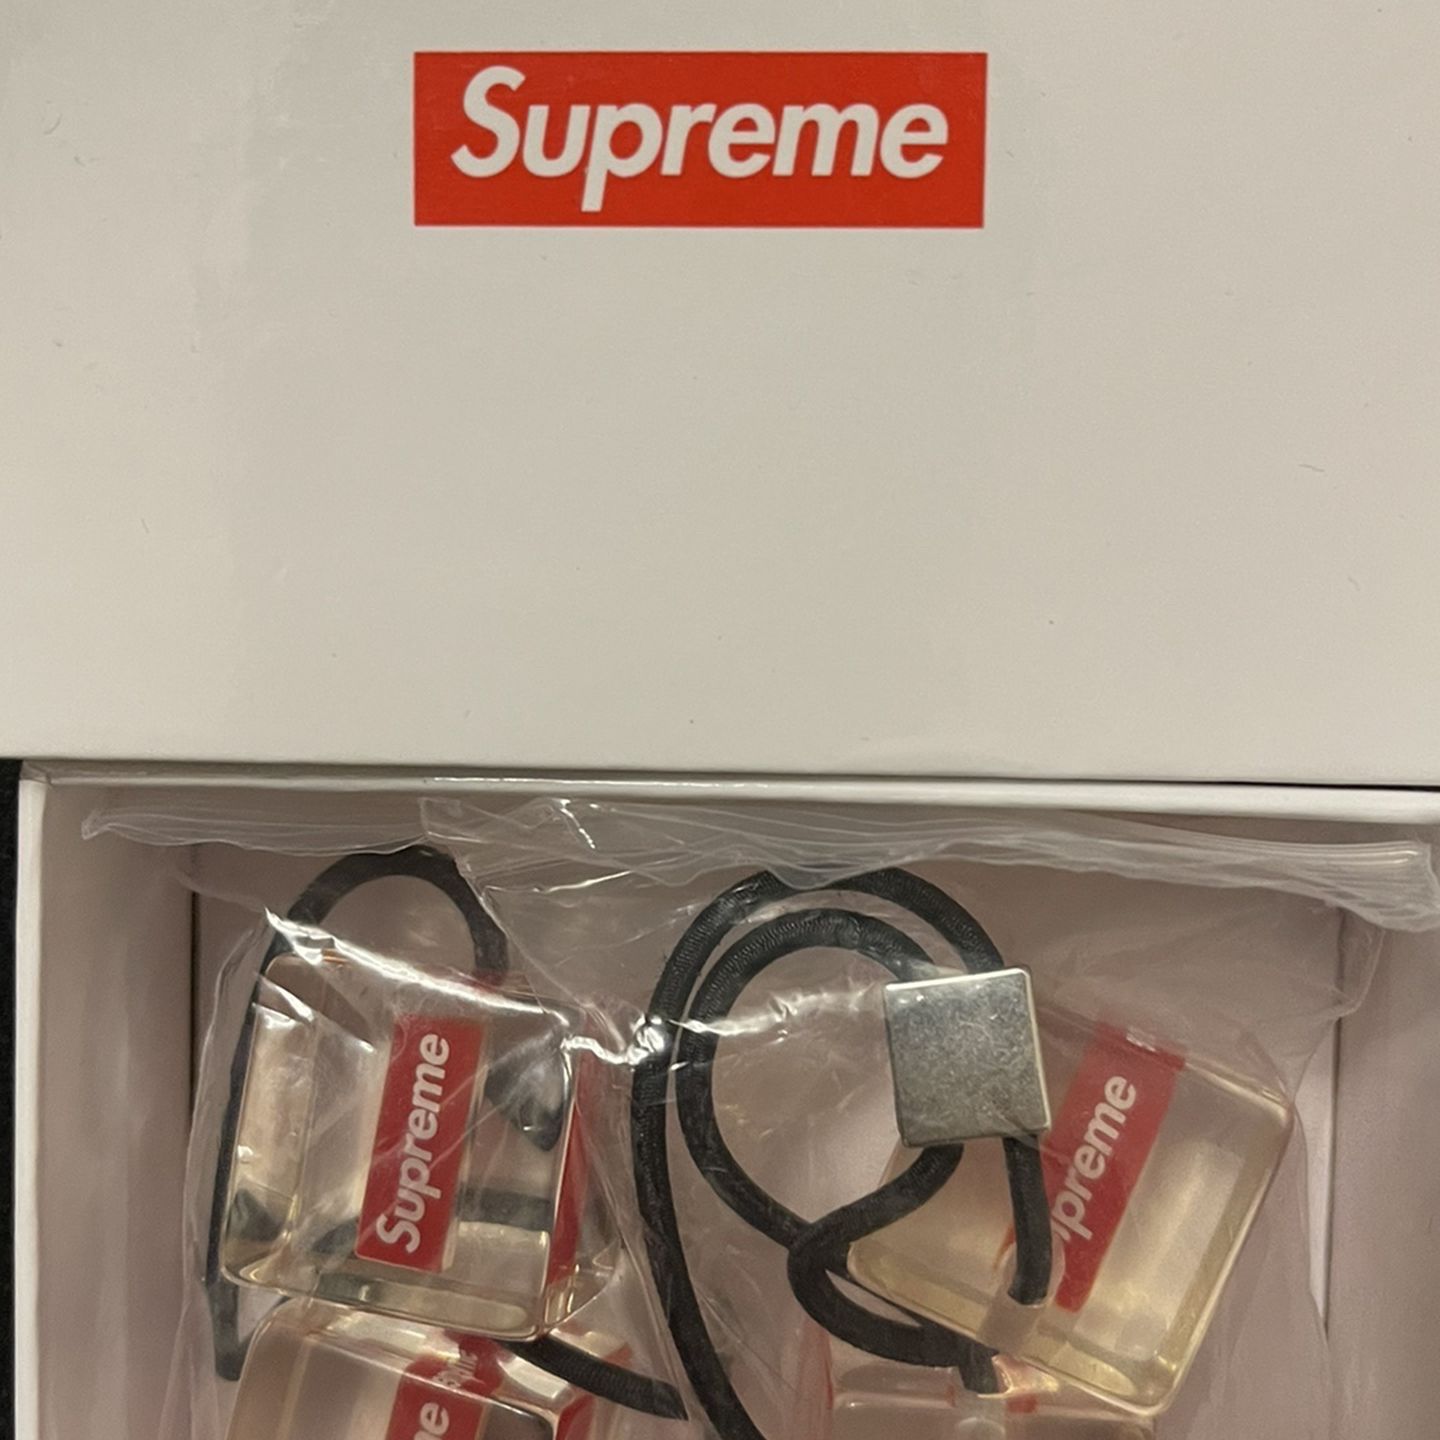 Supreme Hair Bobbles Clear Ss18 for Sale in Brisbane, CA - OfferUp